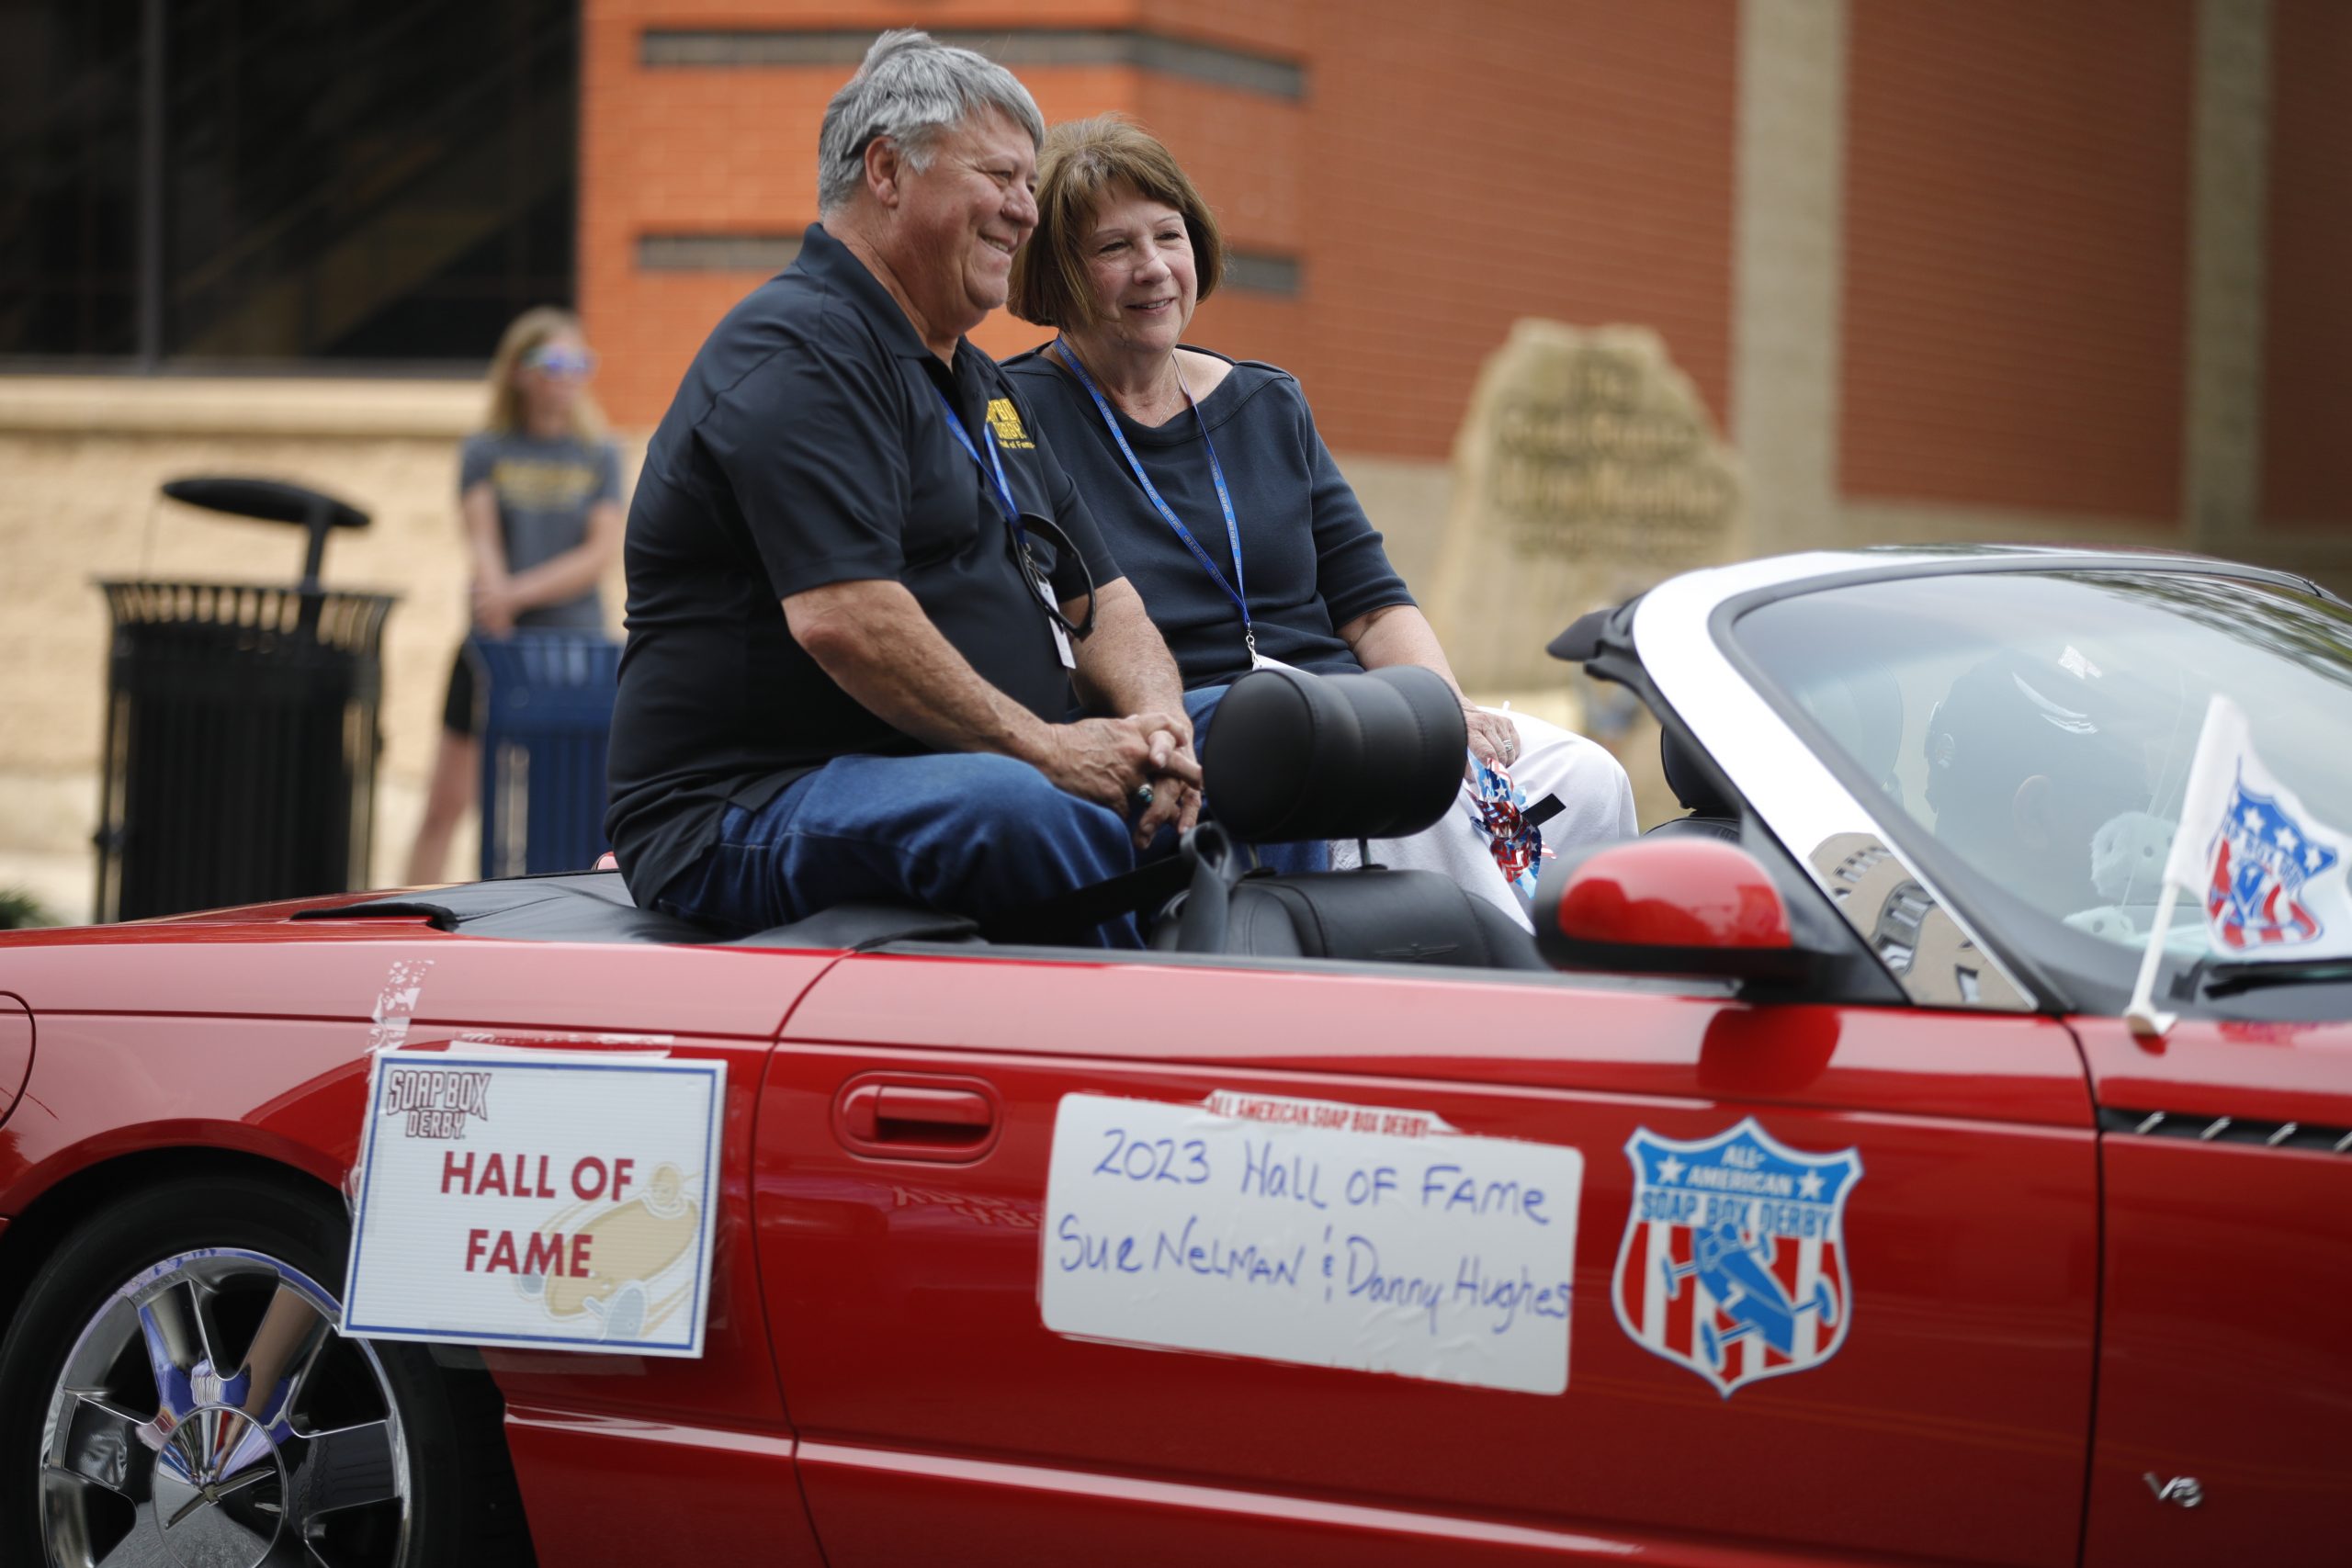 2023 Hall of Fame inductees riding in parade